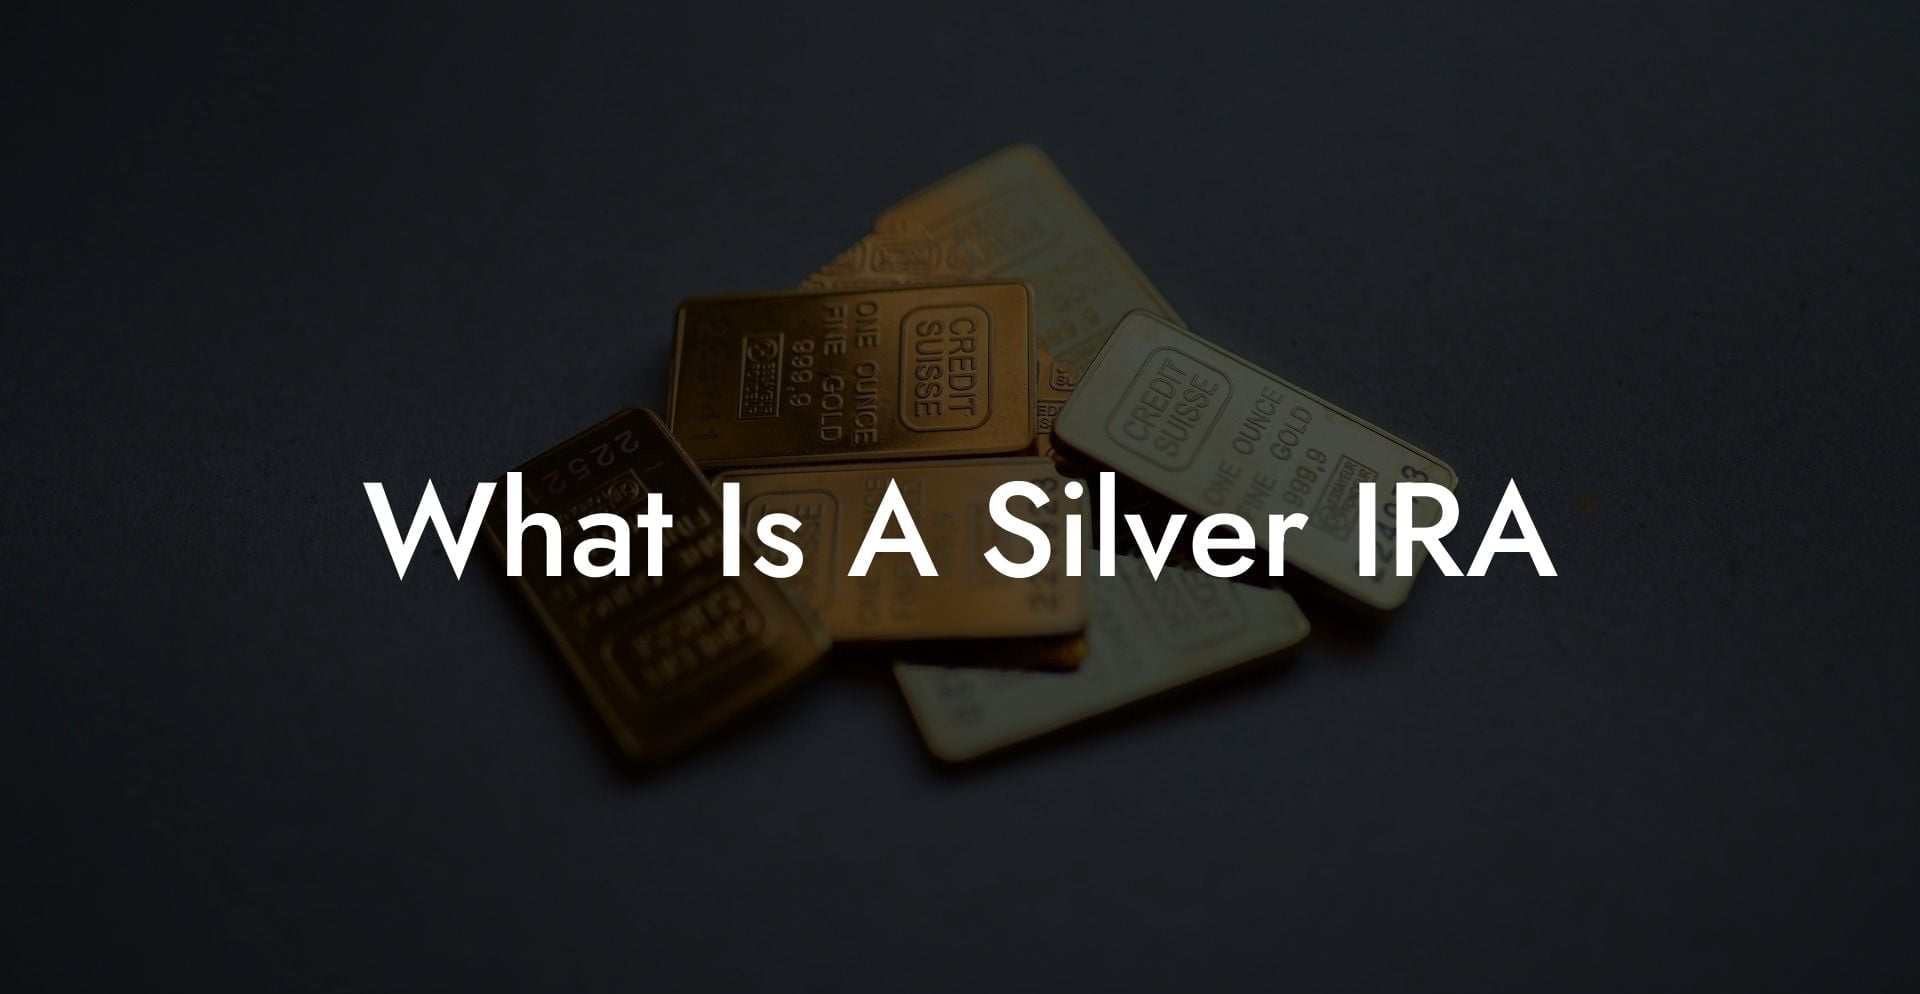 What Is A Silver IRA?